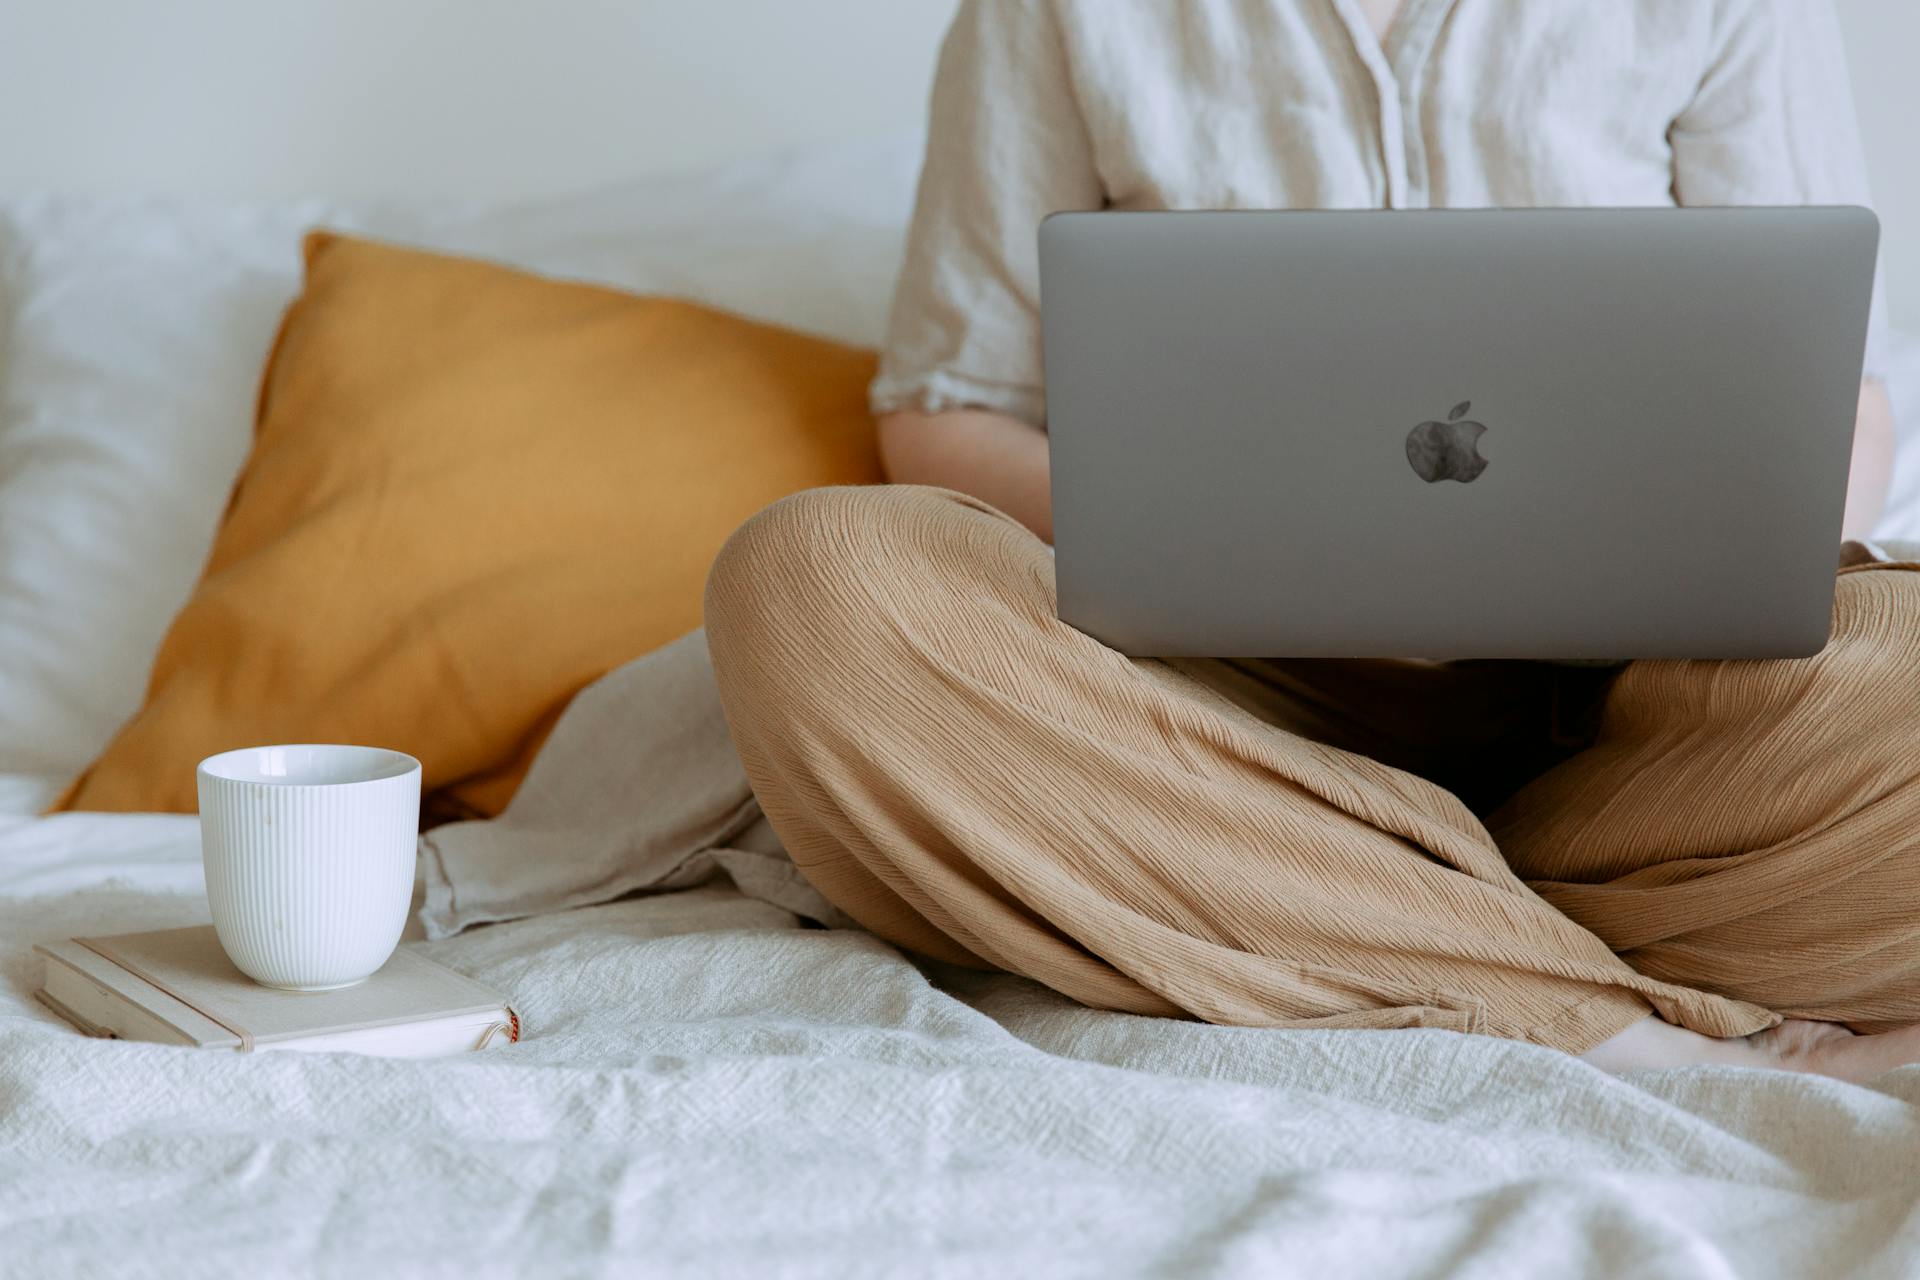 An unrecognizable woman using a laptop in her bedroom | Source: Pexels